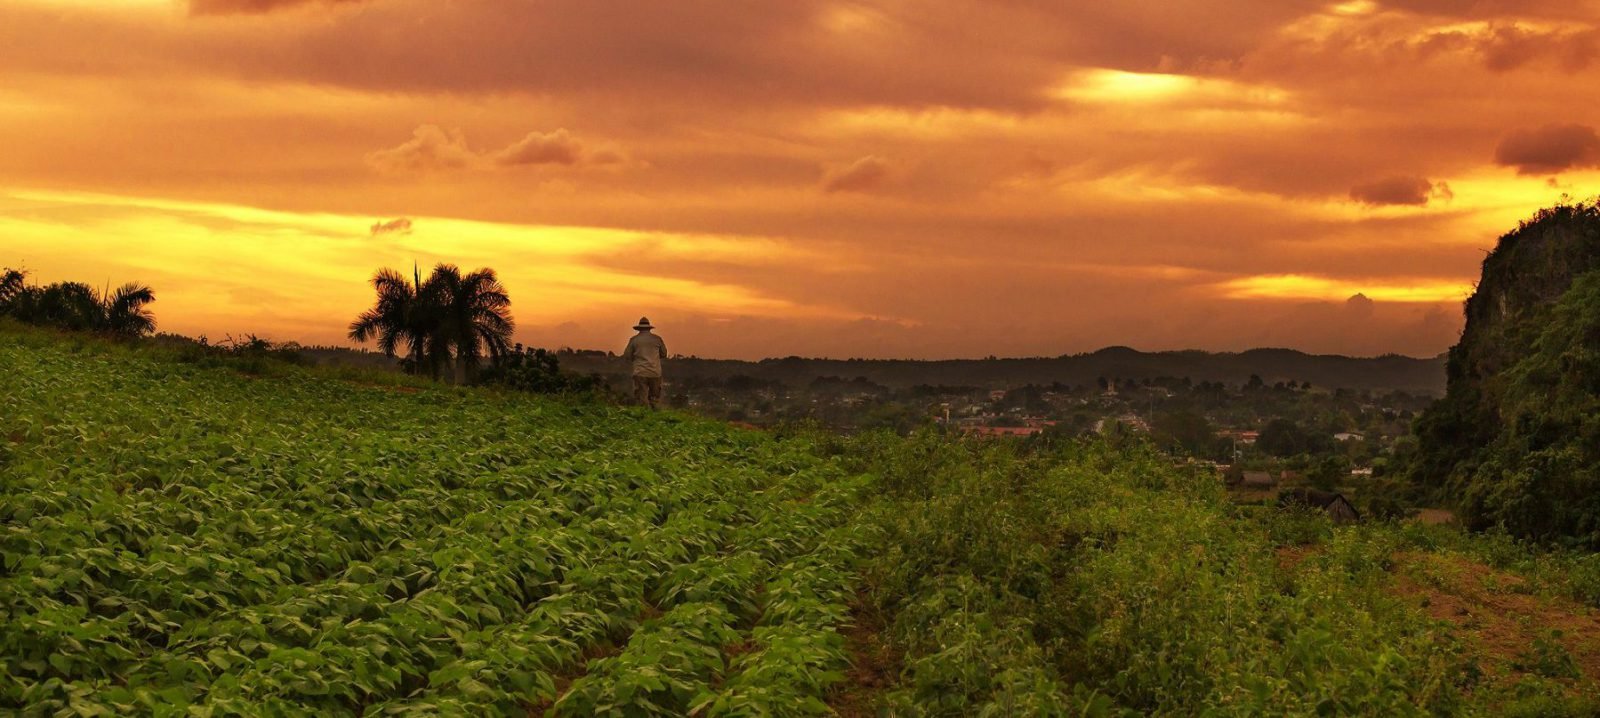 Sunset at Tobacco Farm in Vinales